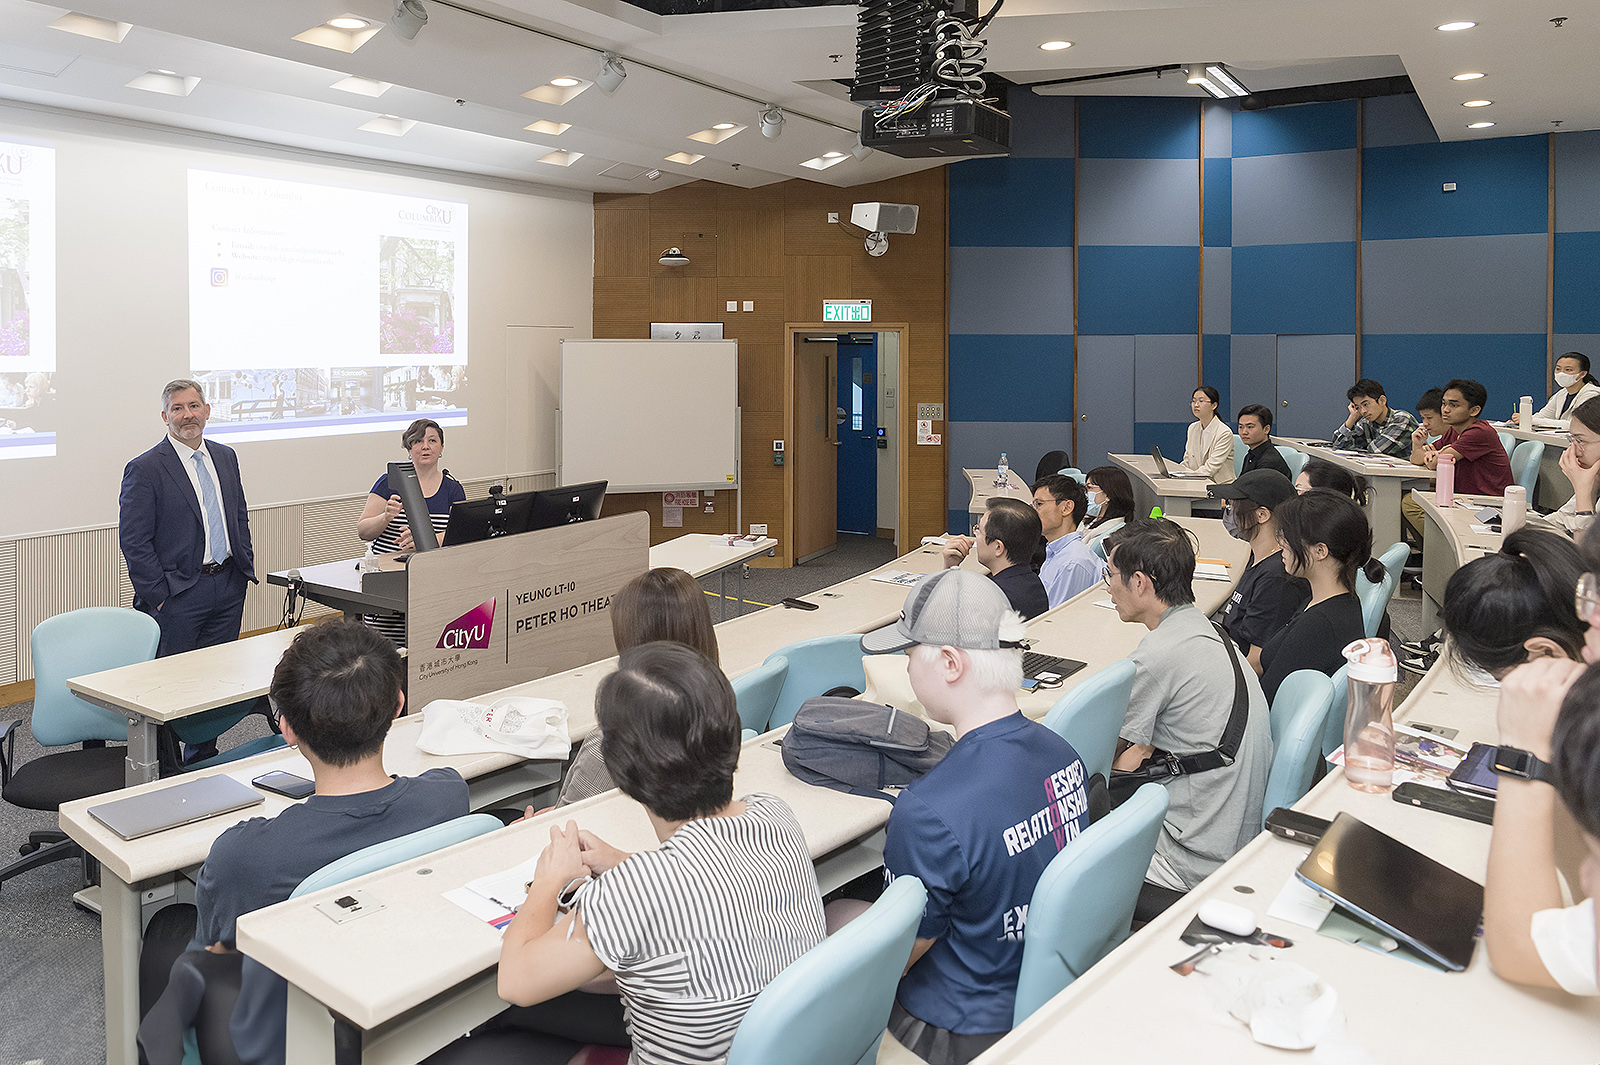 Mr Curtis Rodgers and Ms Jessica Sarles-Dinsick, from Columbia University in the United States, deliver a talk on the Joint Bachelor's Degree Programme between CityU and Columbia University.